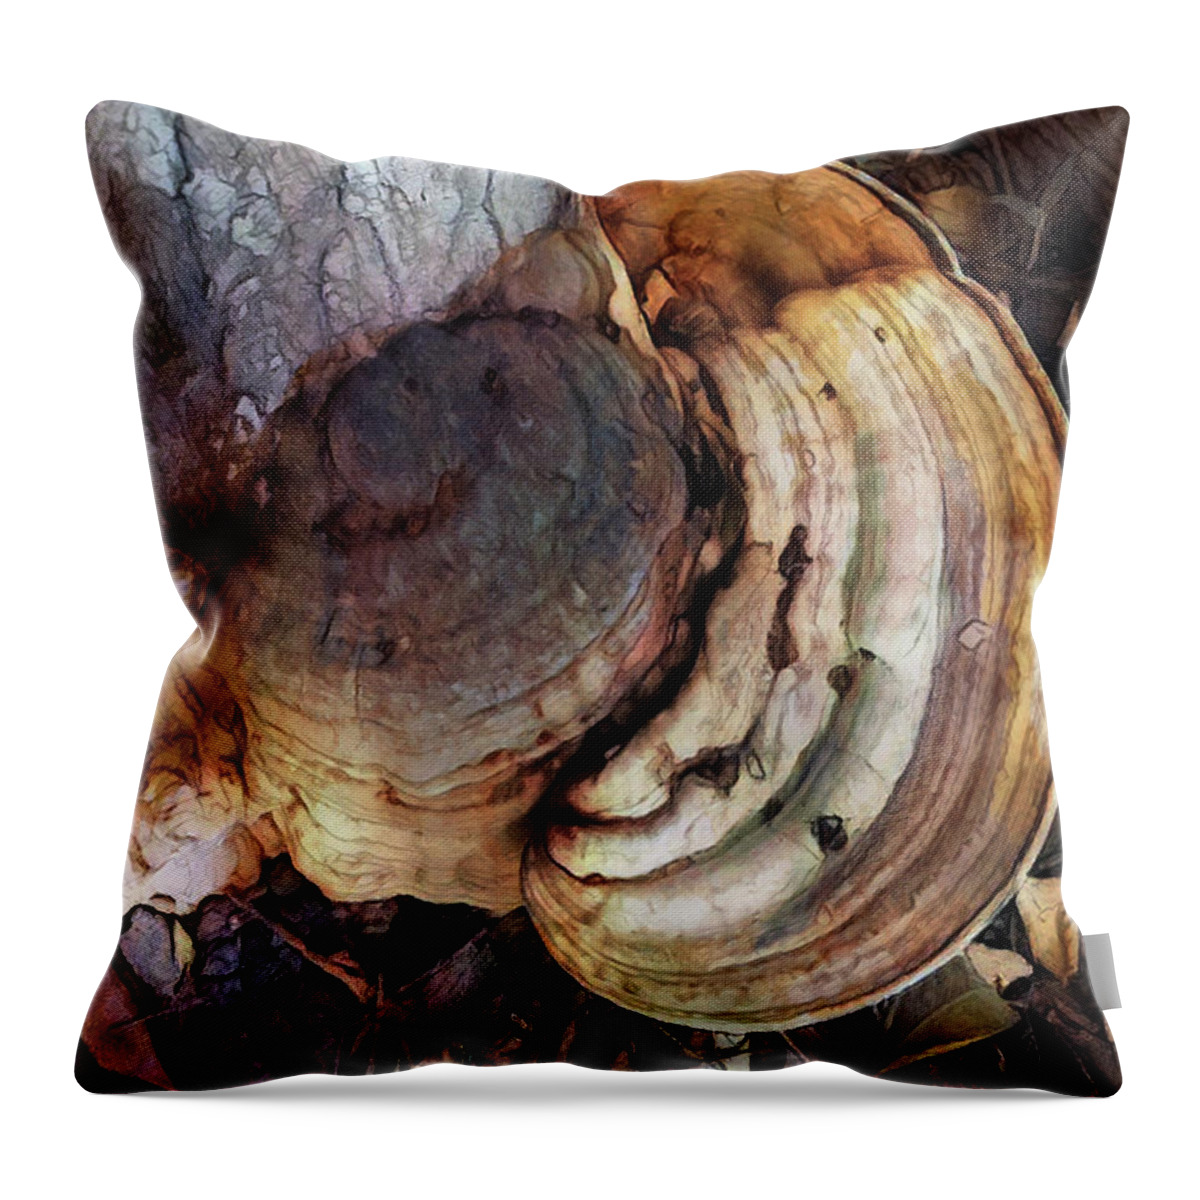 Photo Throw Pillow featuring the photograph Rings Of Fungi by Tim Nyberg